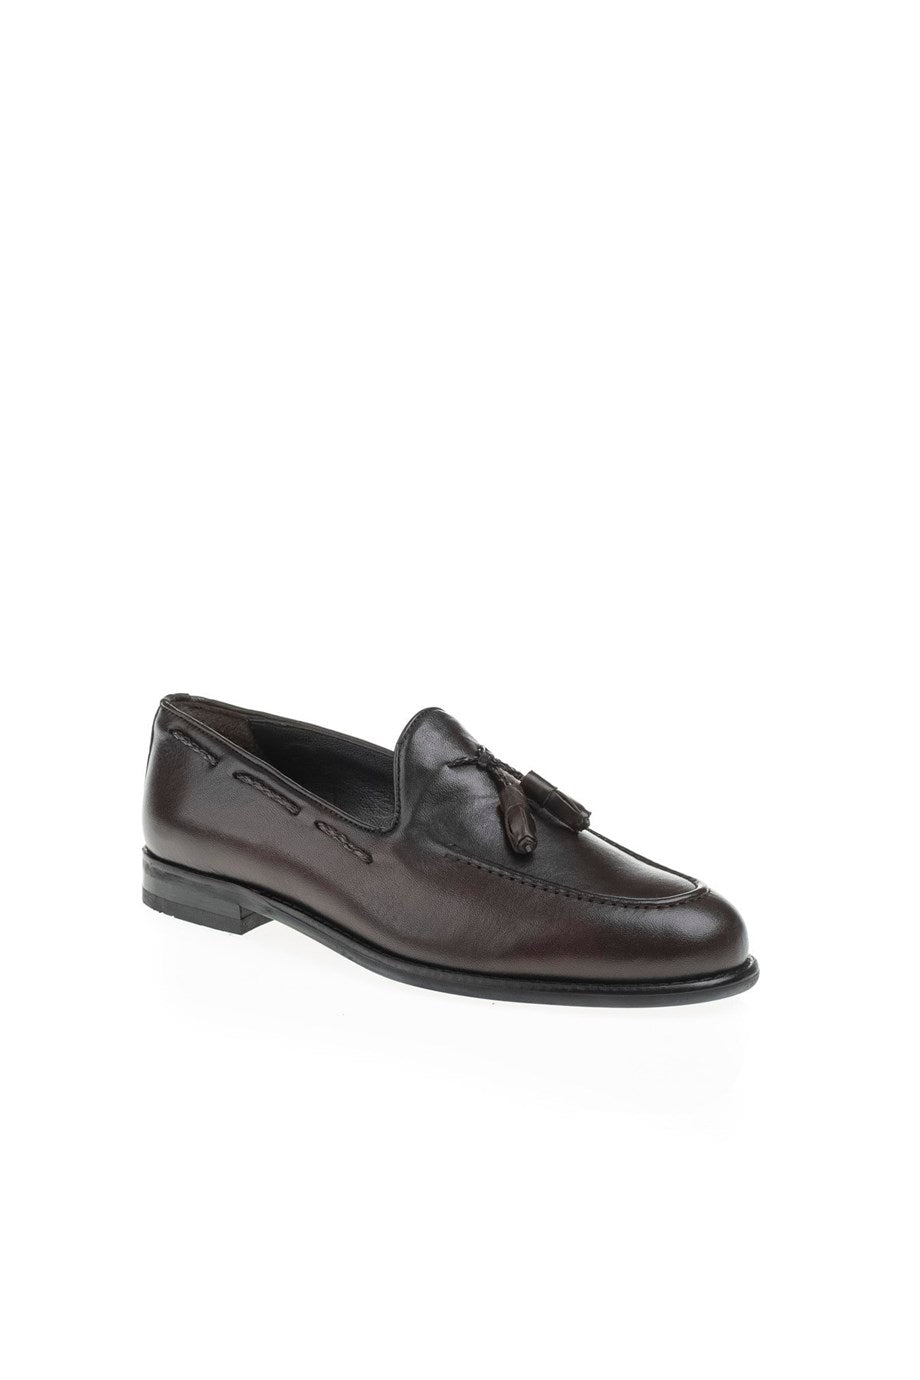 Loafer Genuine Leather Shoes - MENSTYLEWITH